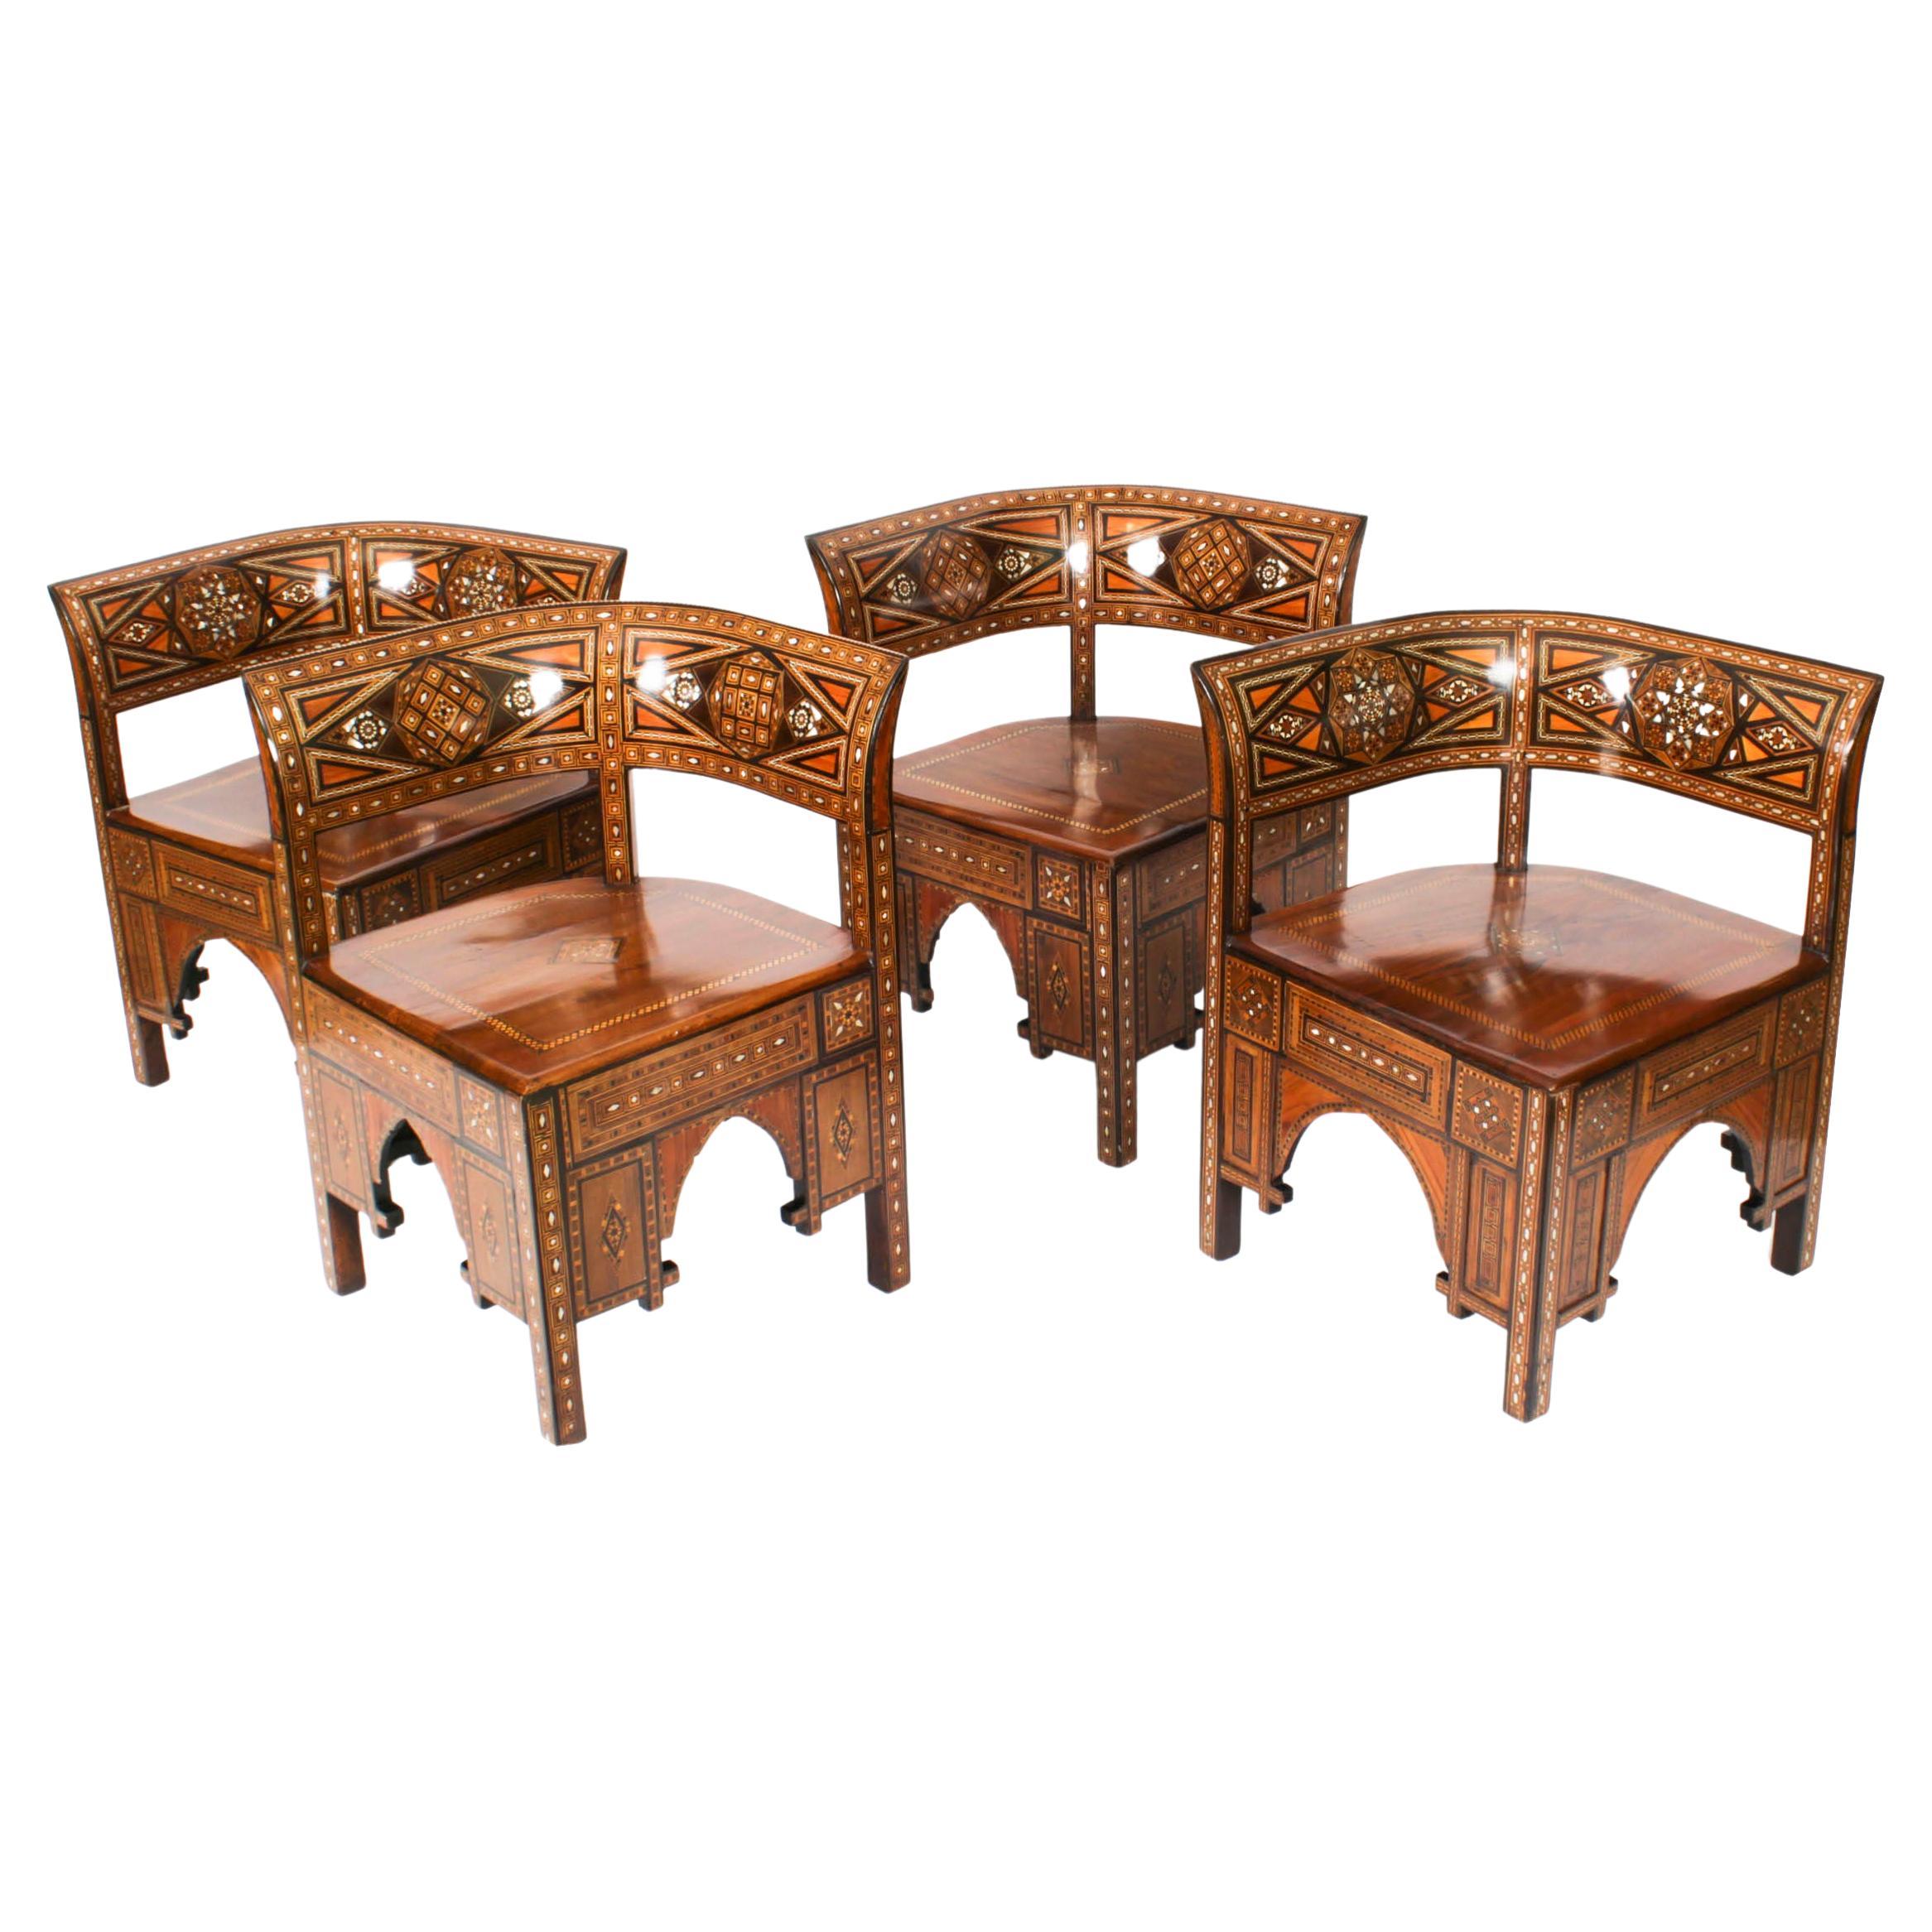 Antique Set of 4 Syrian Parquetry Inlaid Armchairs, Early 20th Century